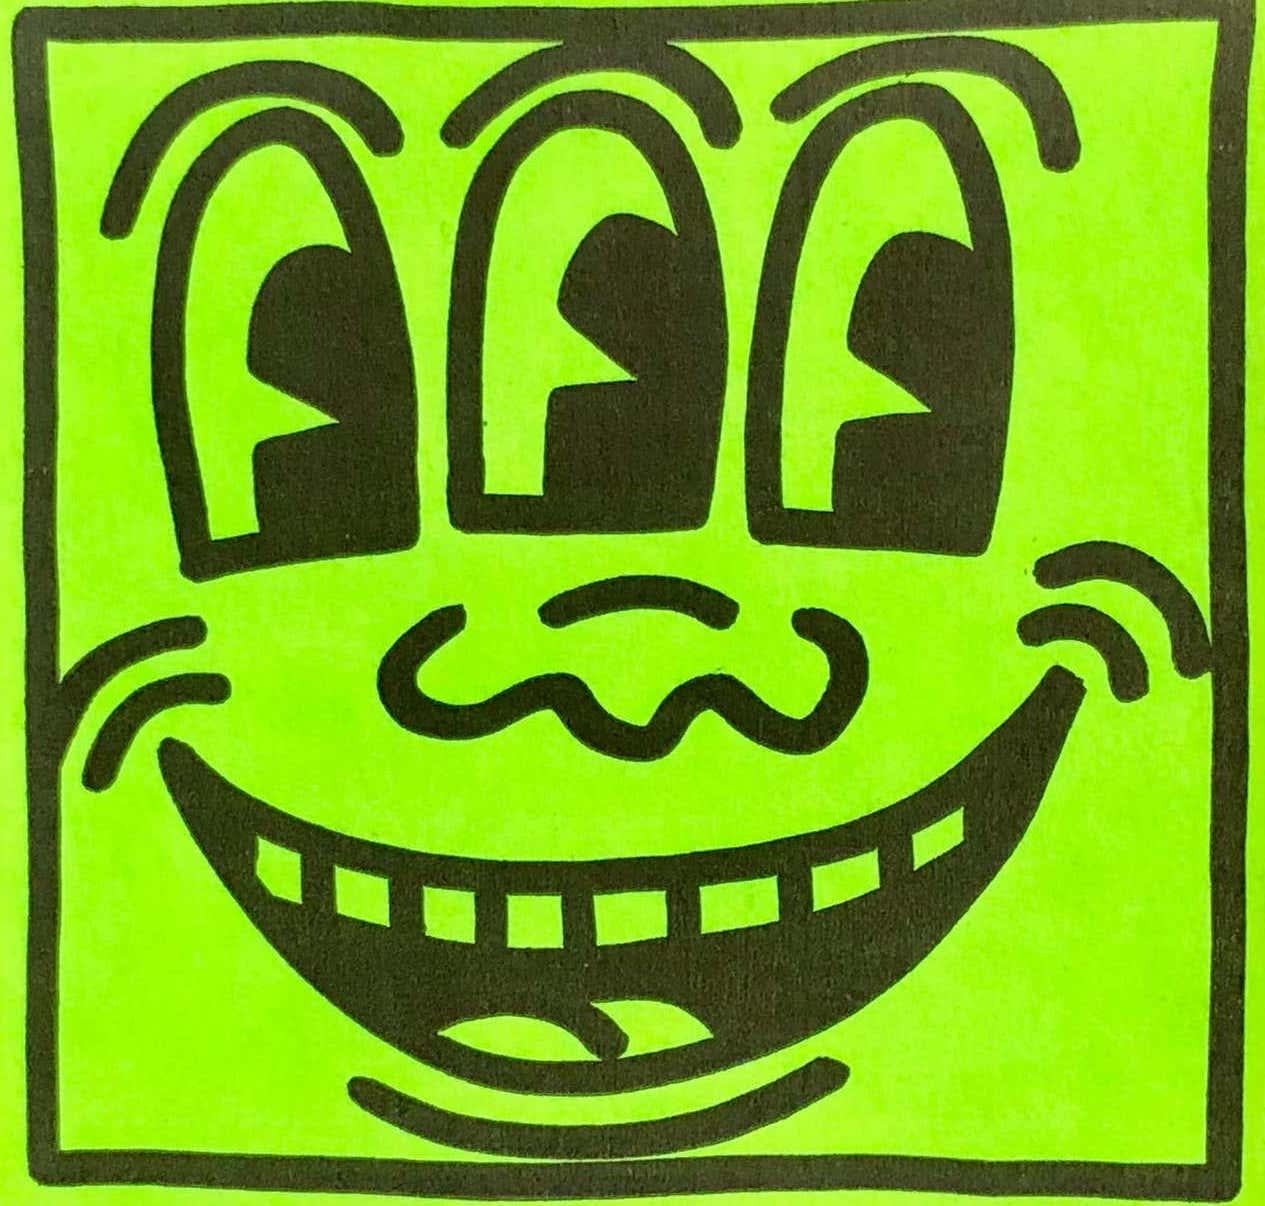 Keith Haring, années 1980, autocollant « Haring early 80s » à trois yeux souriants  en vente 1